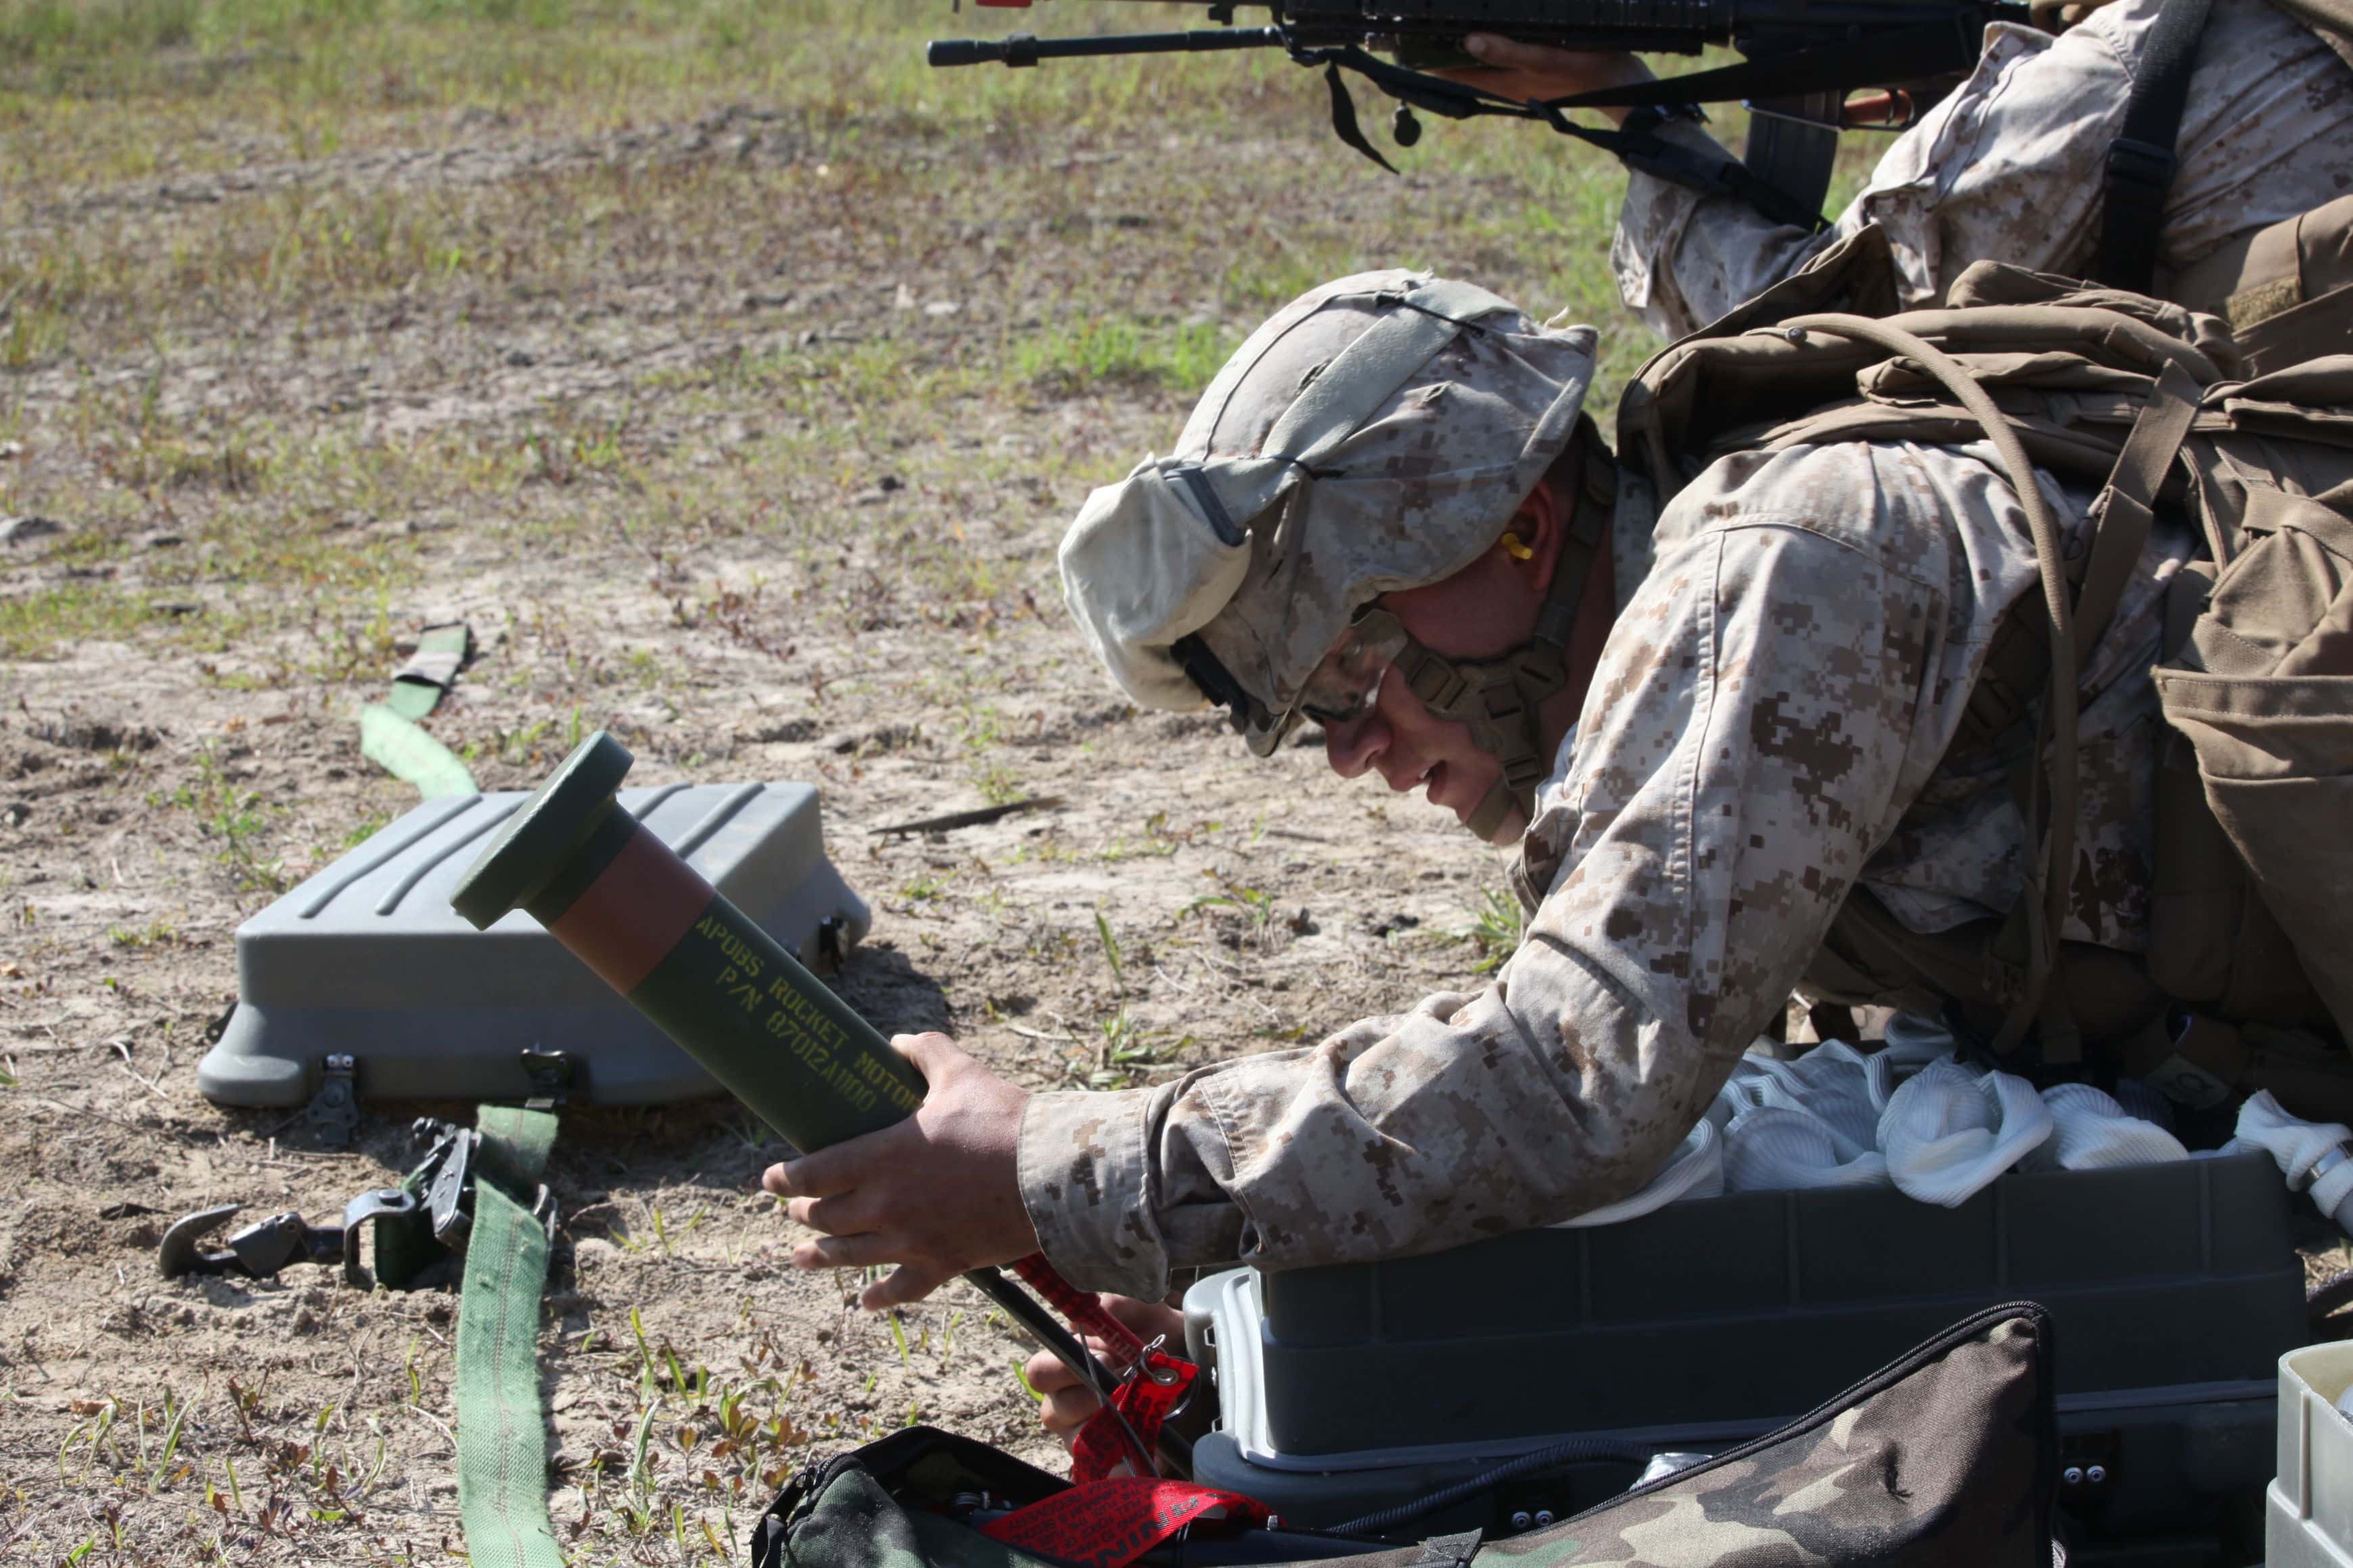 Pfc. Steven A. Olivas, a combat engineer with 2nd Combat Engineer Battalion, 2nd Marine Division, prepares the rocket used to deploy an Anti-Personnel Obstacle Breaching System. After the pin is pulled, there is a time delay in order to provide the Marines time to fall back under cover to ensure no casualties from the grenades exploding. (U.S. Marine Corps photo by Pfc. David N. Hersey/Released)